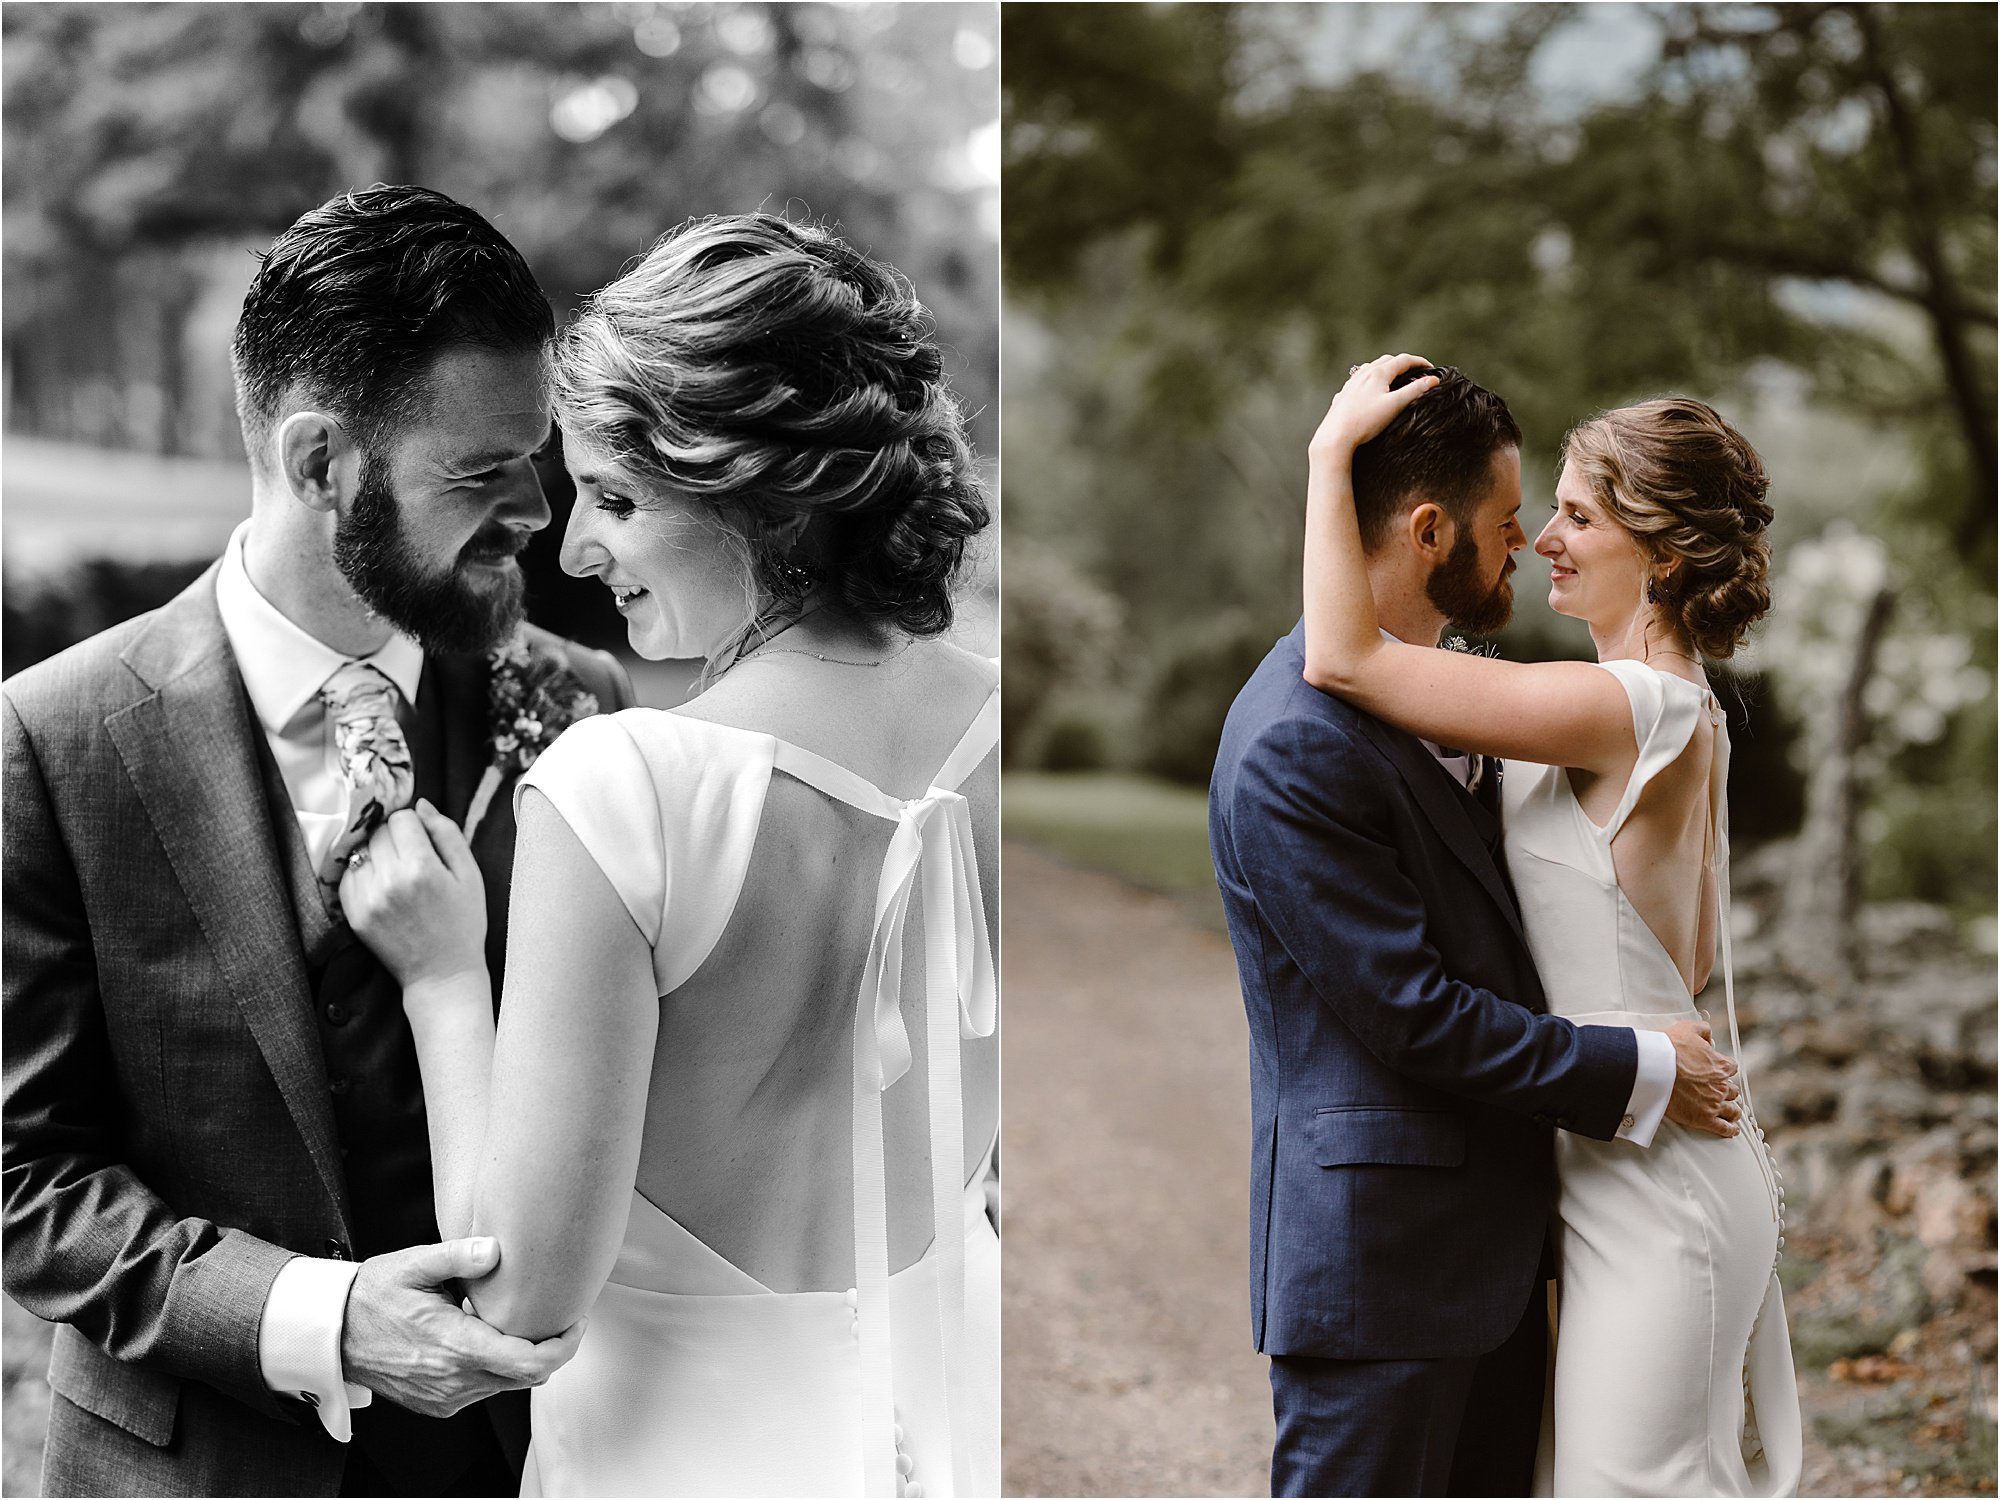 bride and groom hug and kiss while standing on dirt road in forest